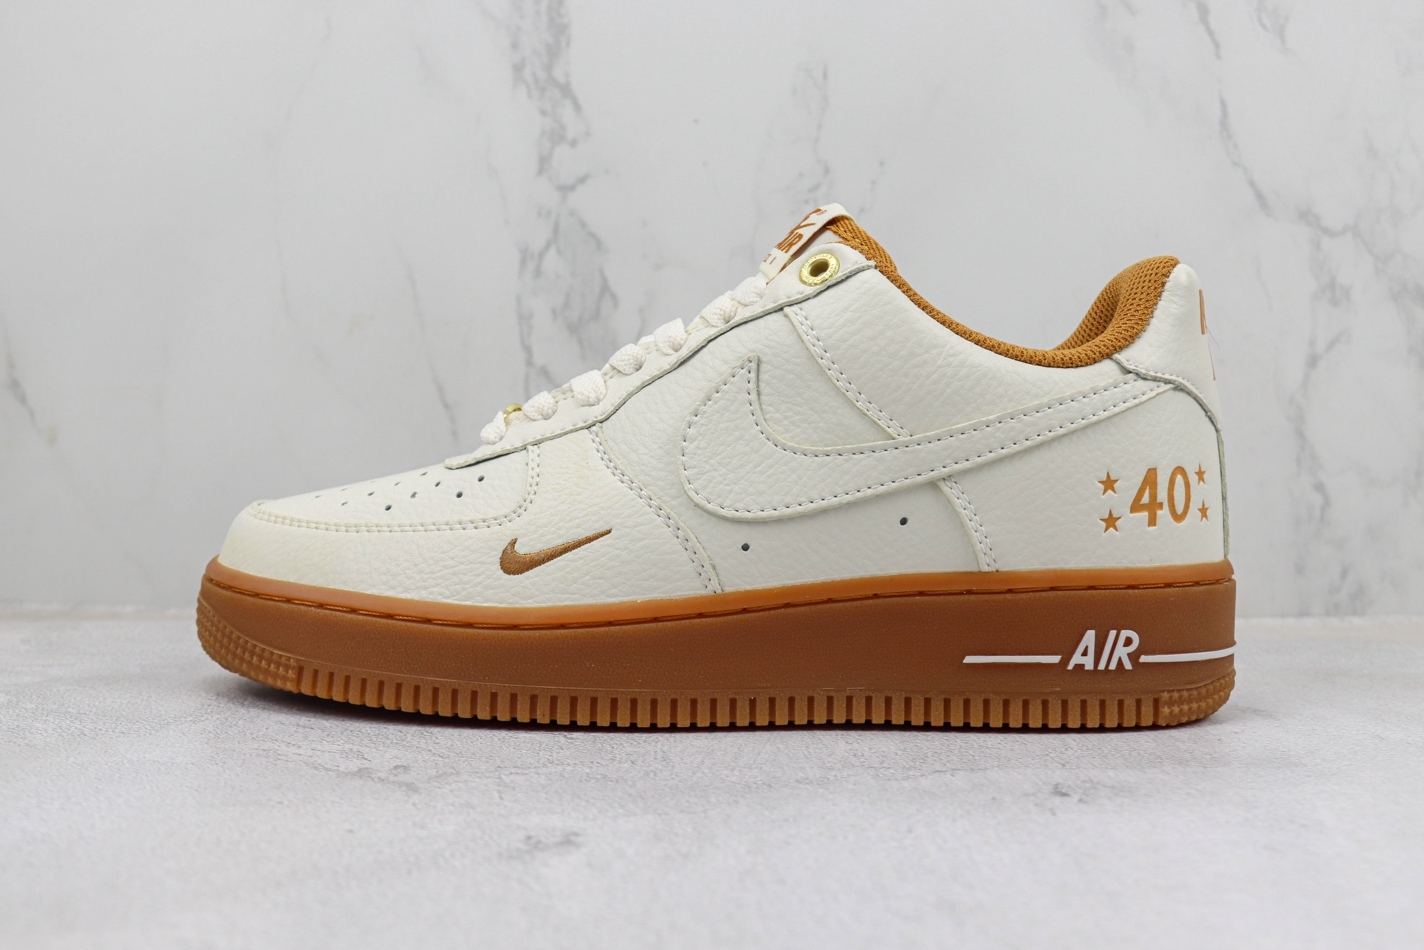 Nike Air Force 1 07 Low Orange Brown White Gold BS9055-742 - Stylish and Trendy Sneakers